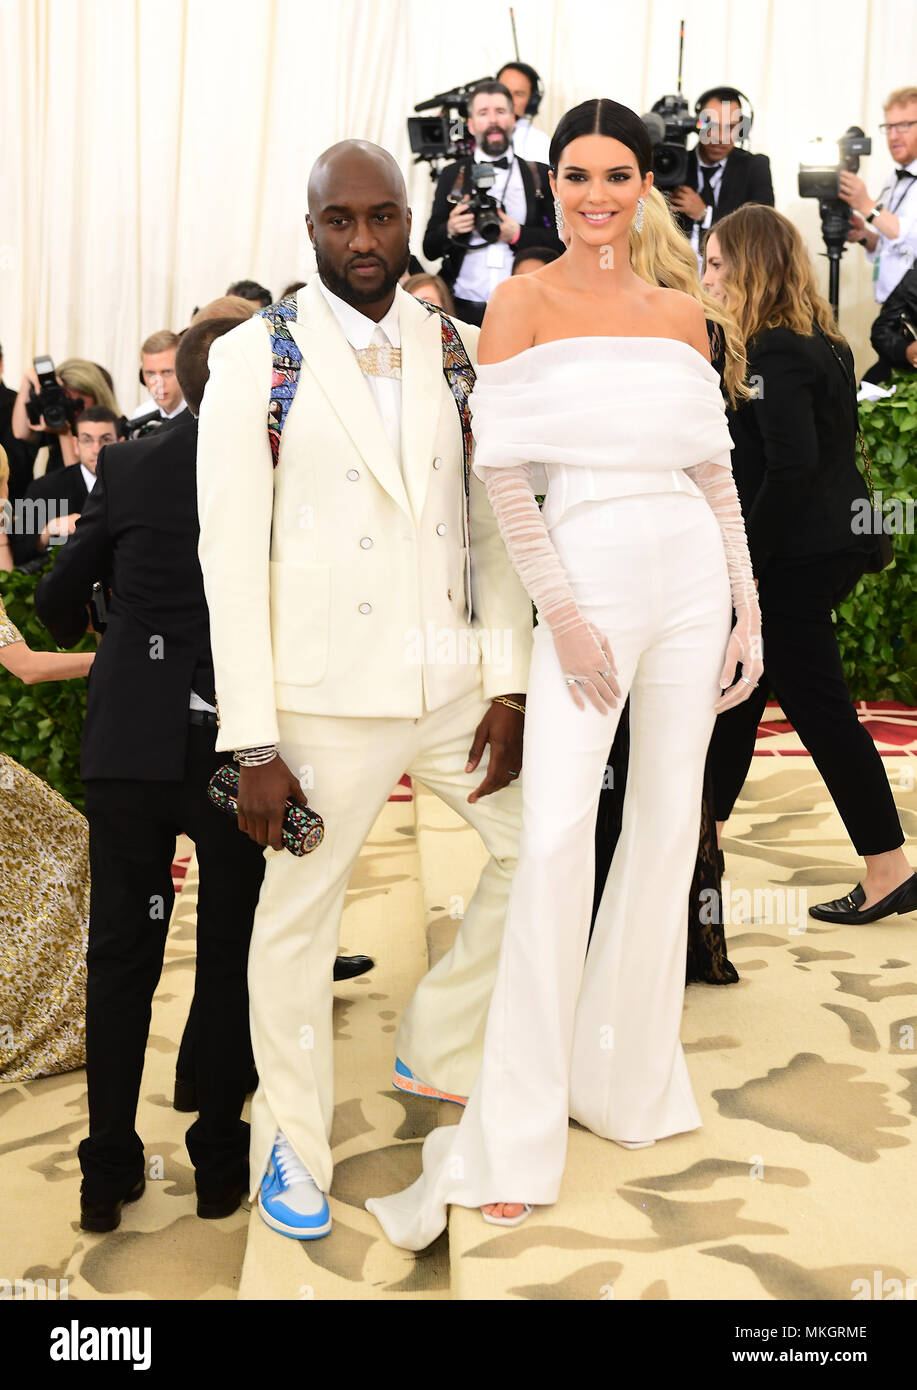 Virgil Abloh of Off-White walking the red carpet at The Metropolitan Museum  of Art Costume Institute Benefit celebrating the opening of Heavenly Bodies  : Fashion and the Catholic Imagination held at The